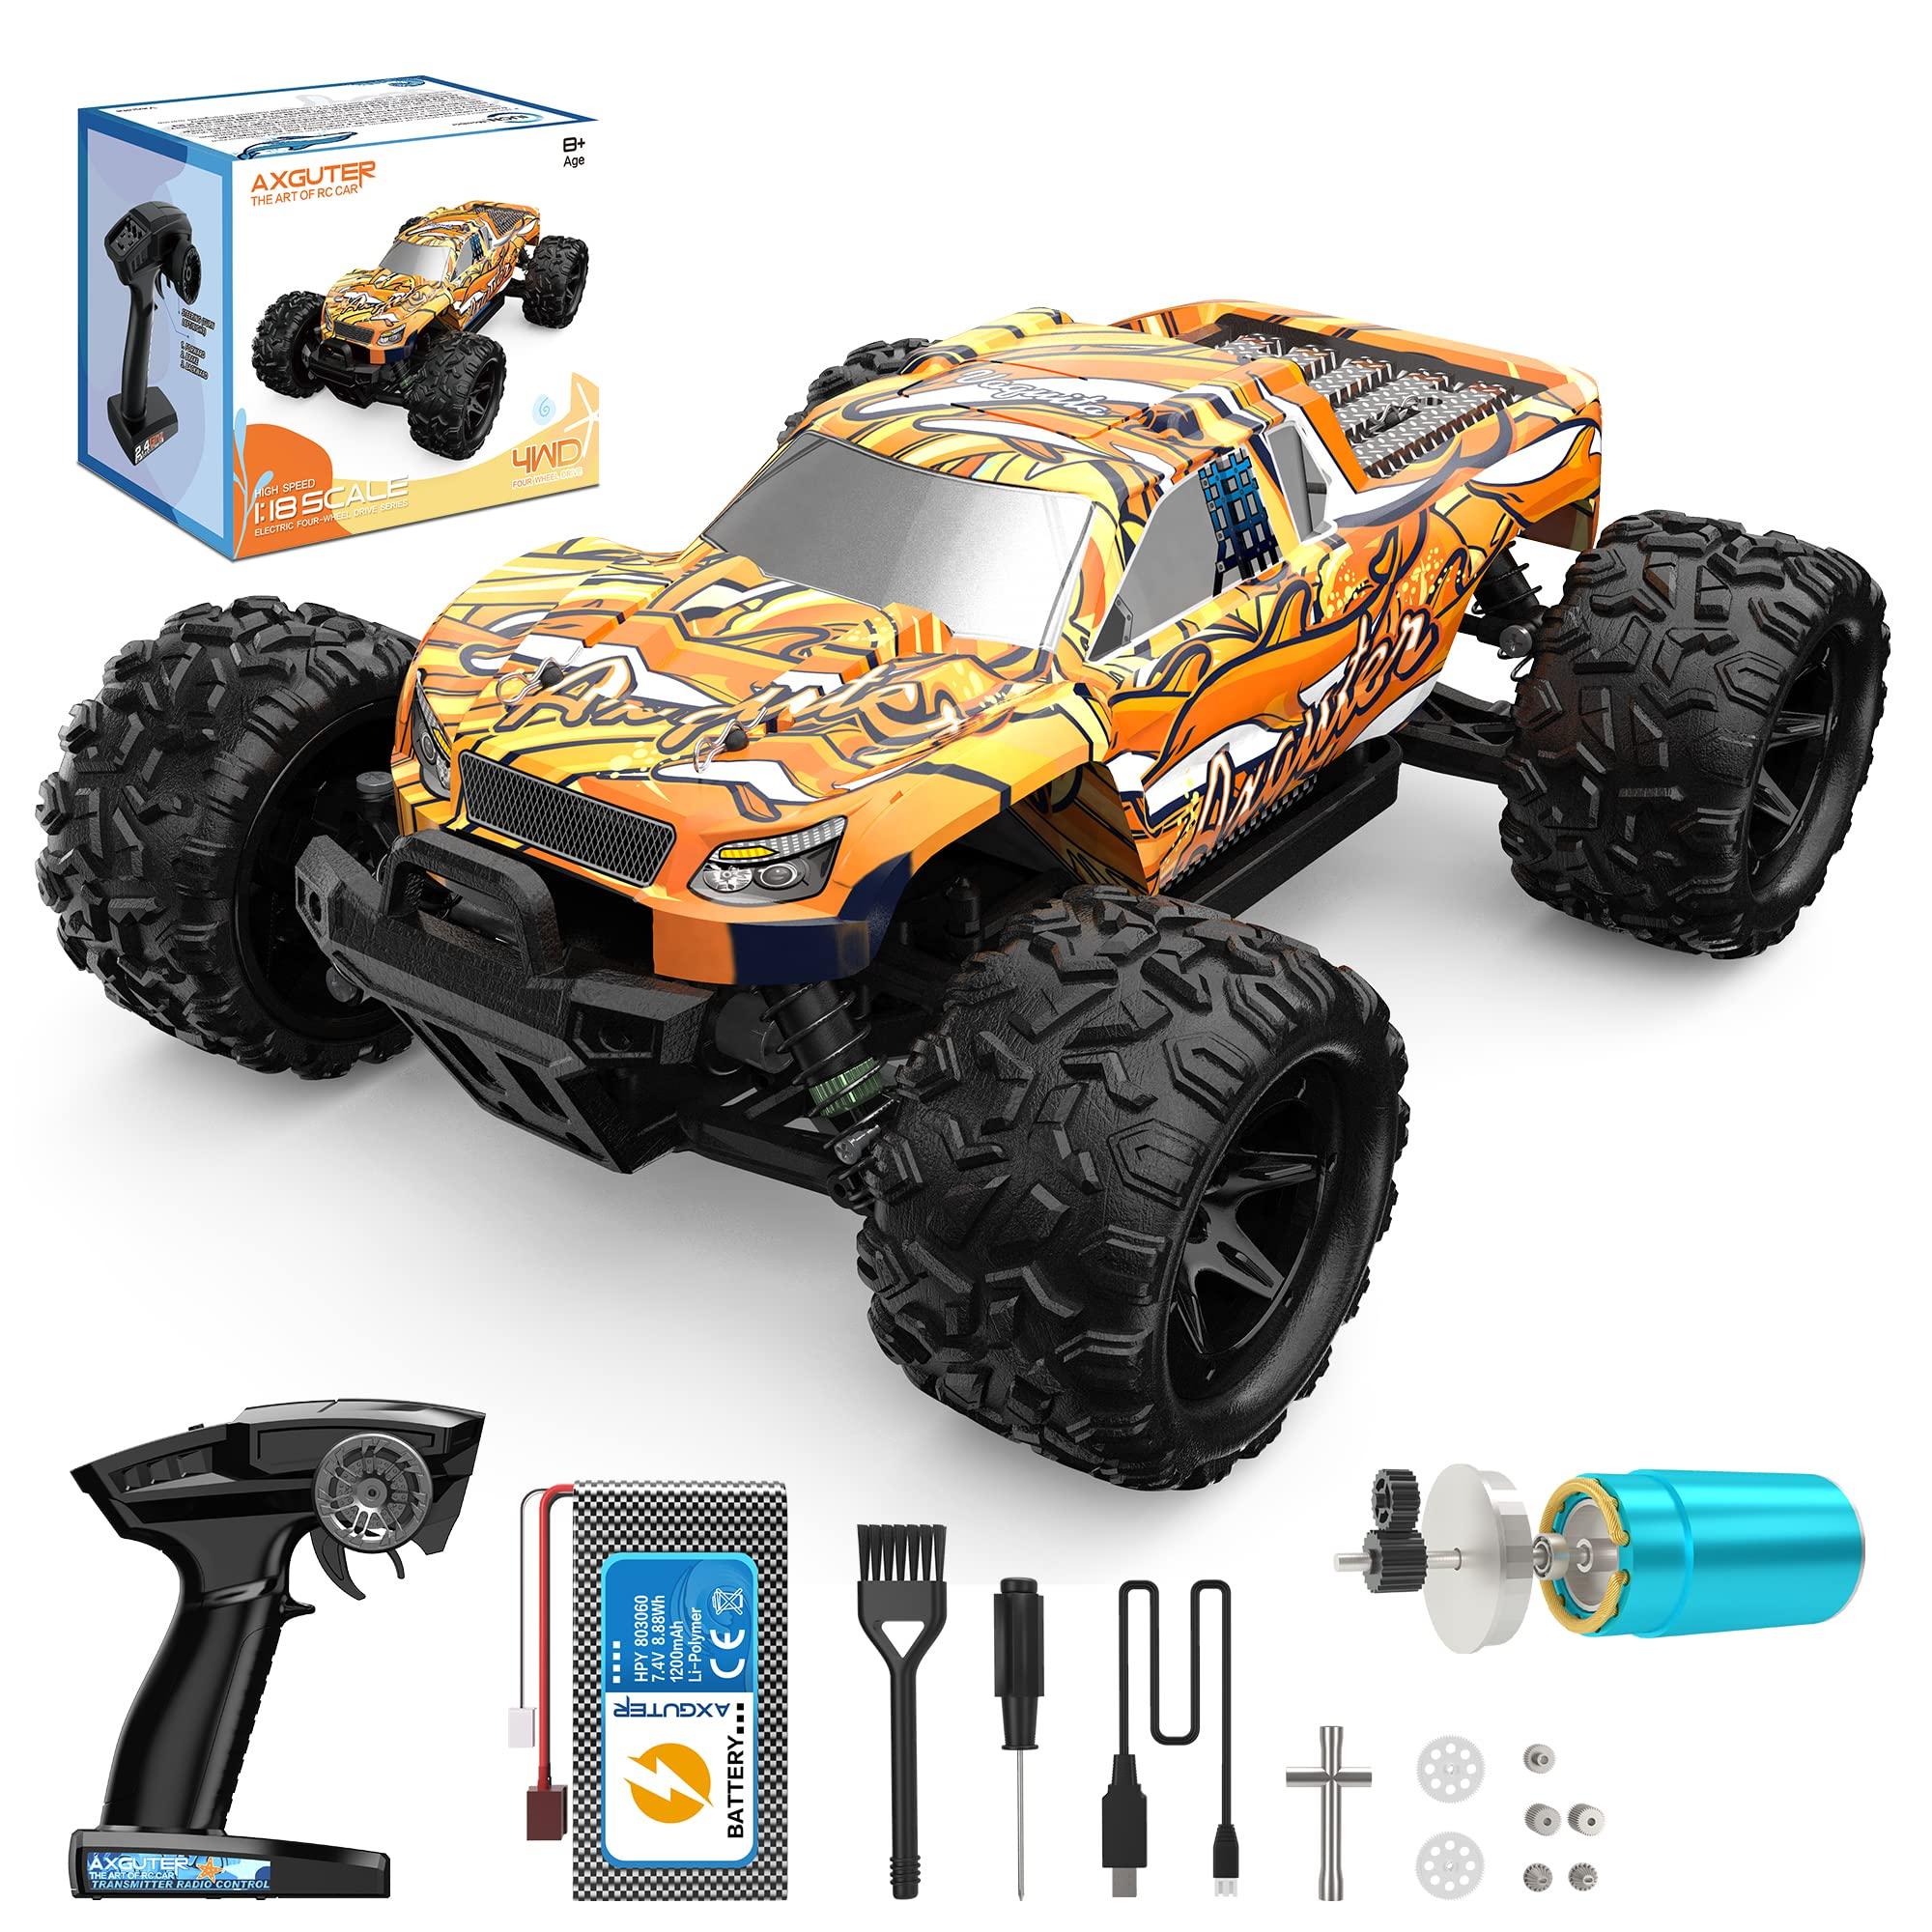 Remote Control Gadgets For Adults: The Top Remote Control Cars for Adults